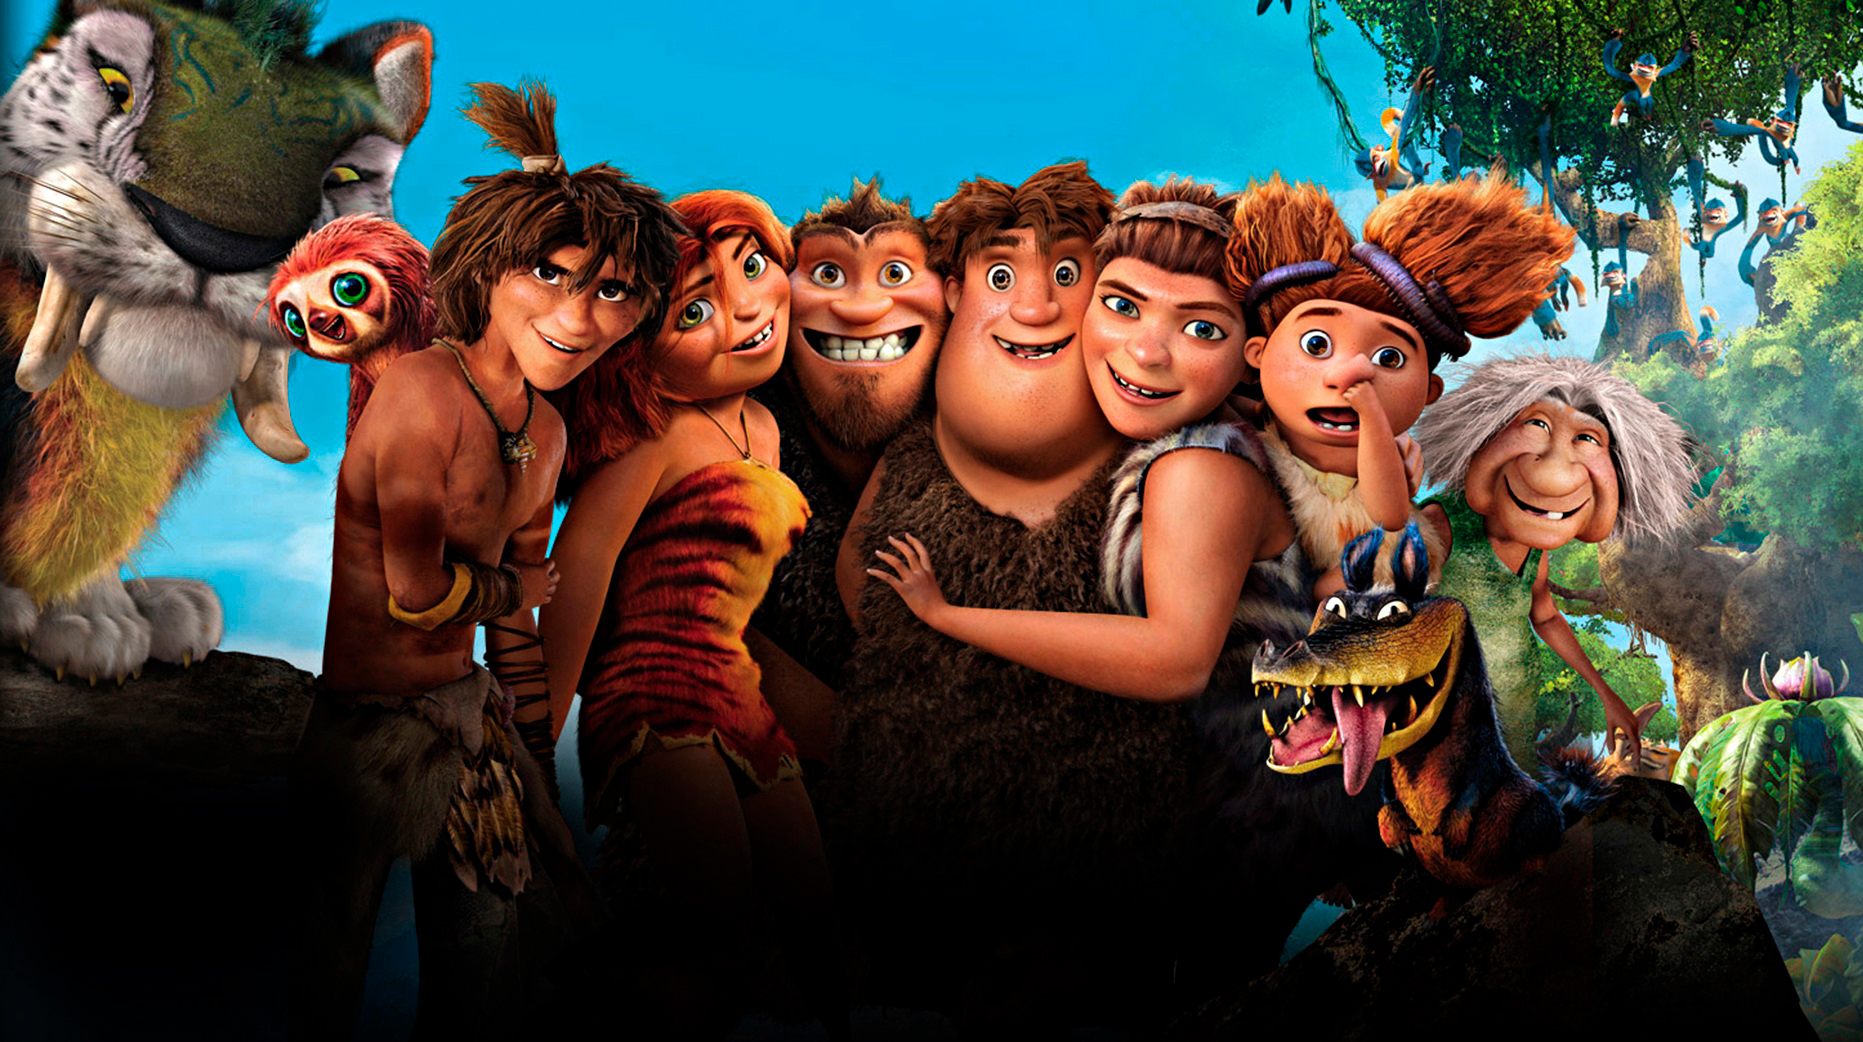 How Did The Croods Deal With Change?